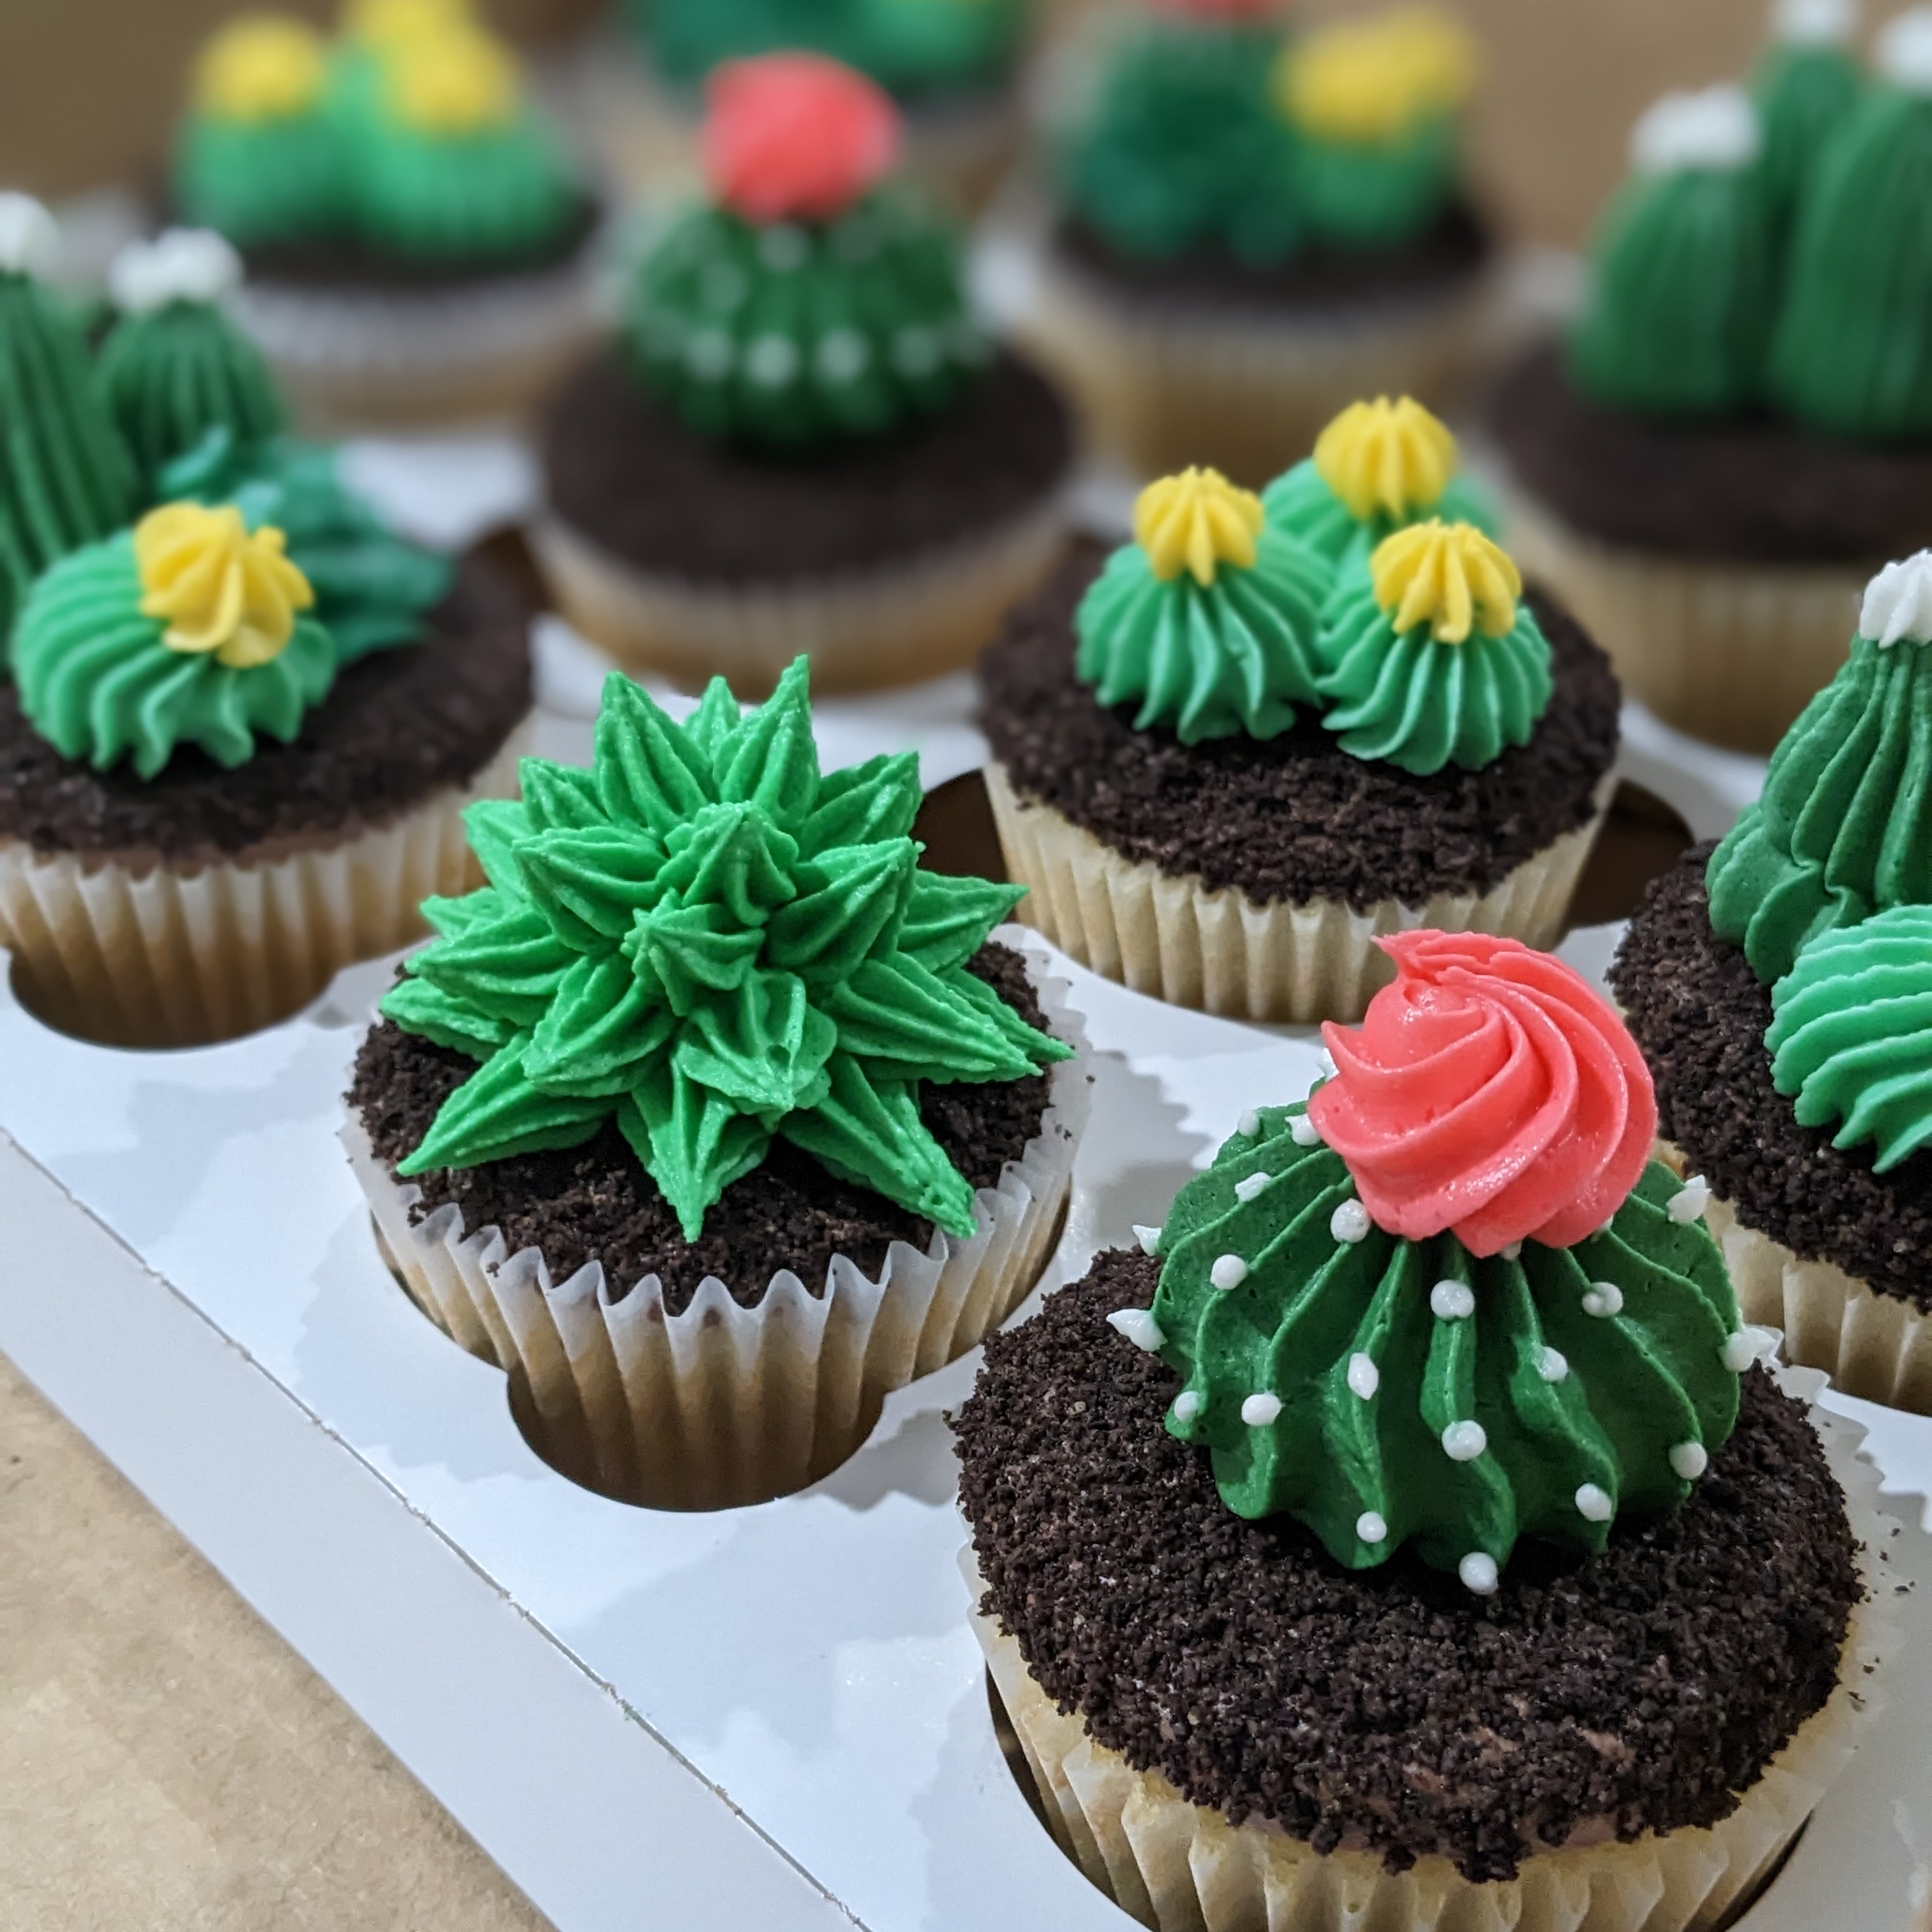 Buttercream Piping Class: Cactus Cupcakes (Afternoon session) - Multi-person station